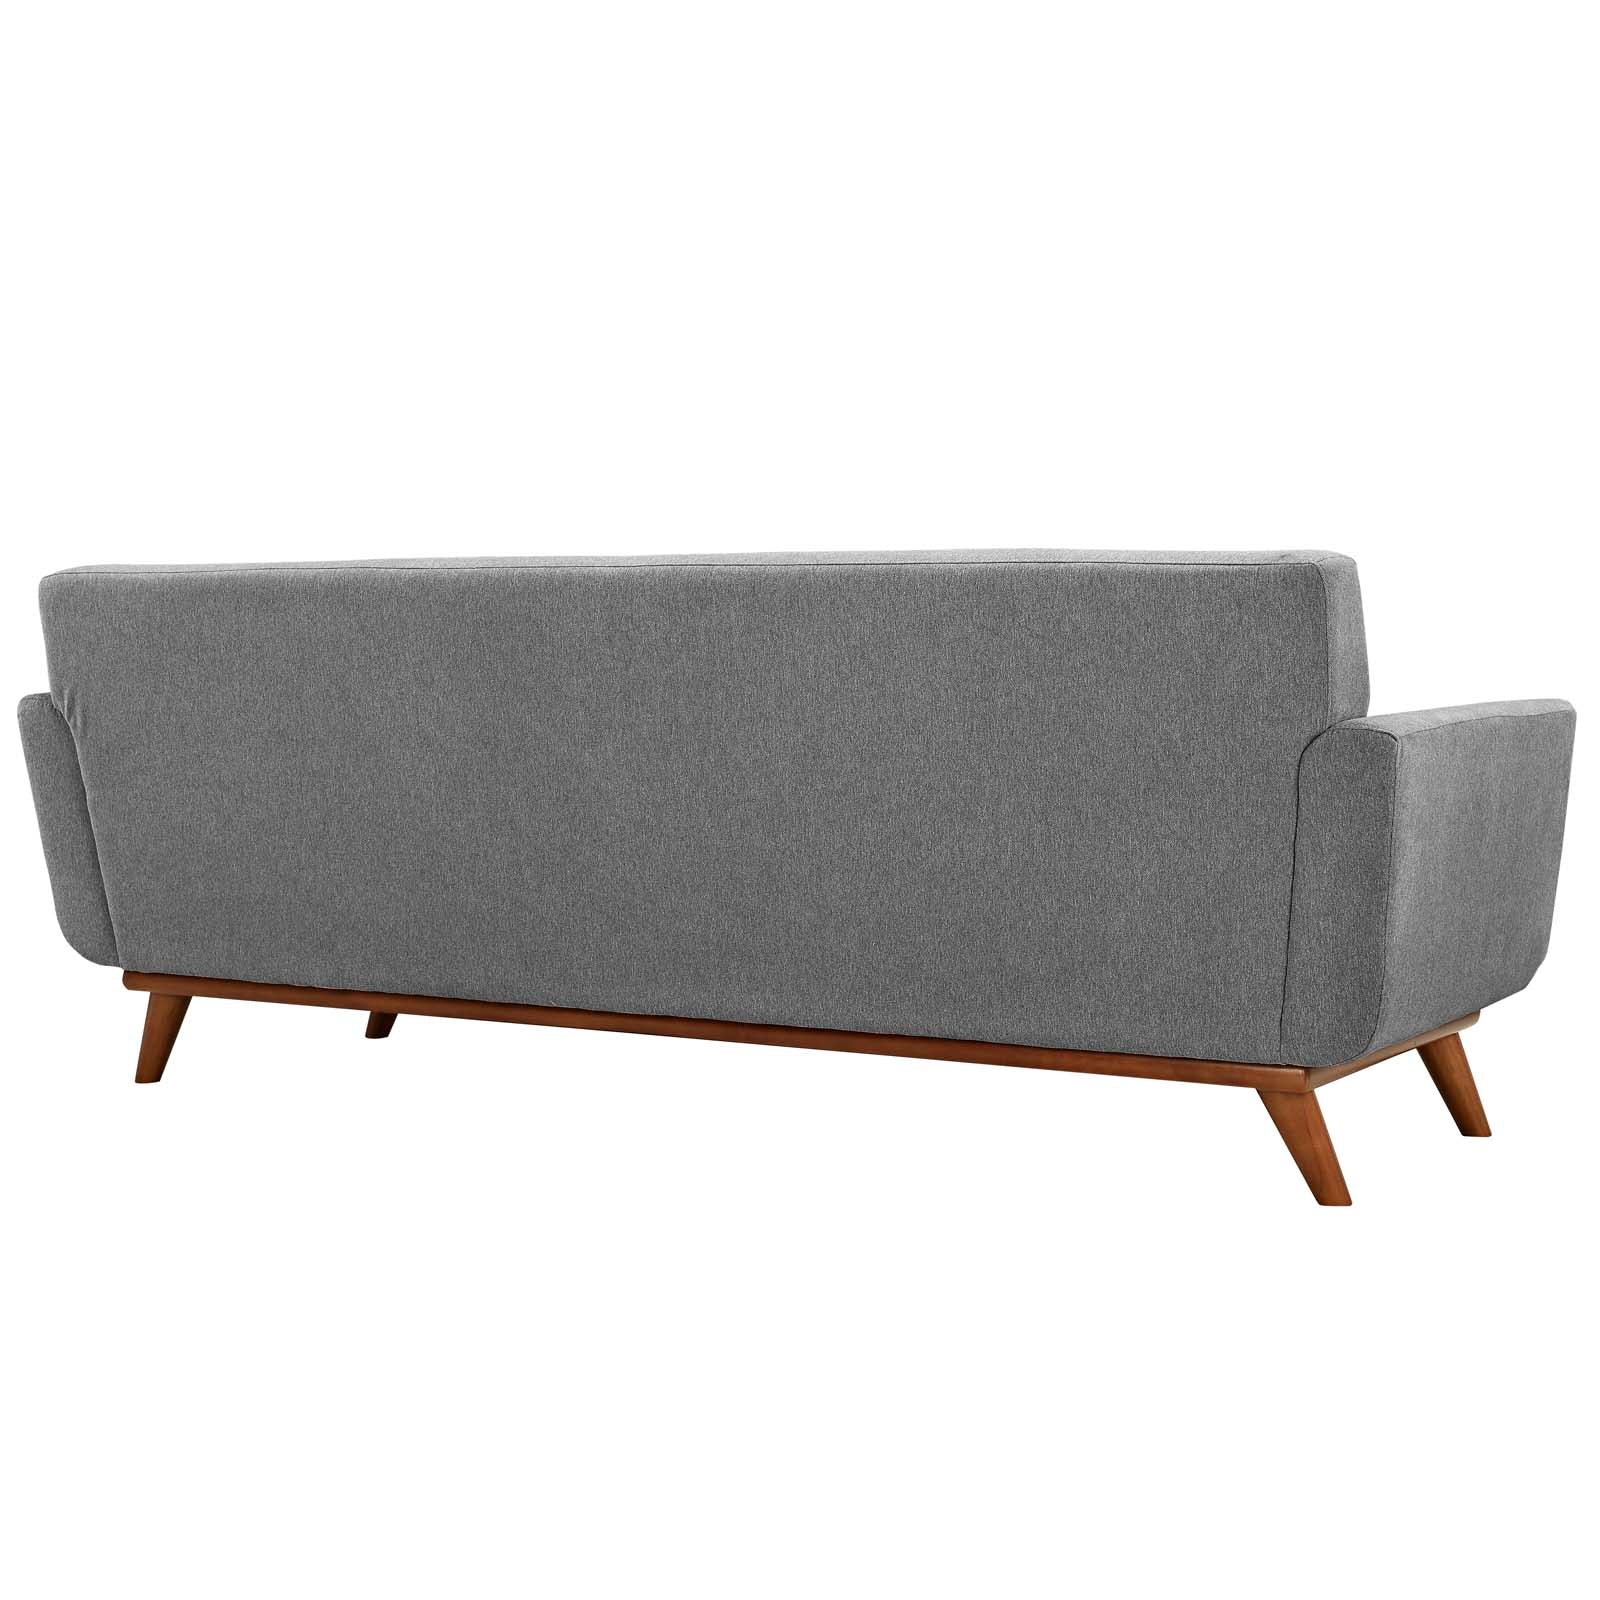 Modway Sofas & Couches - Engage Upholstered Fabric Sofa Expectation Gray